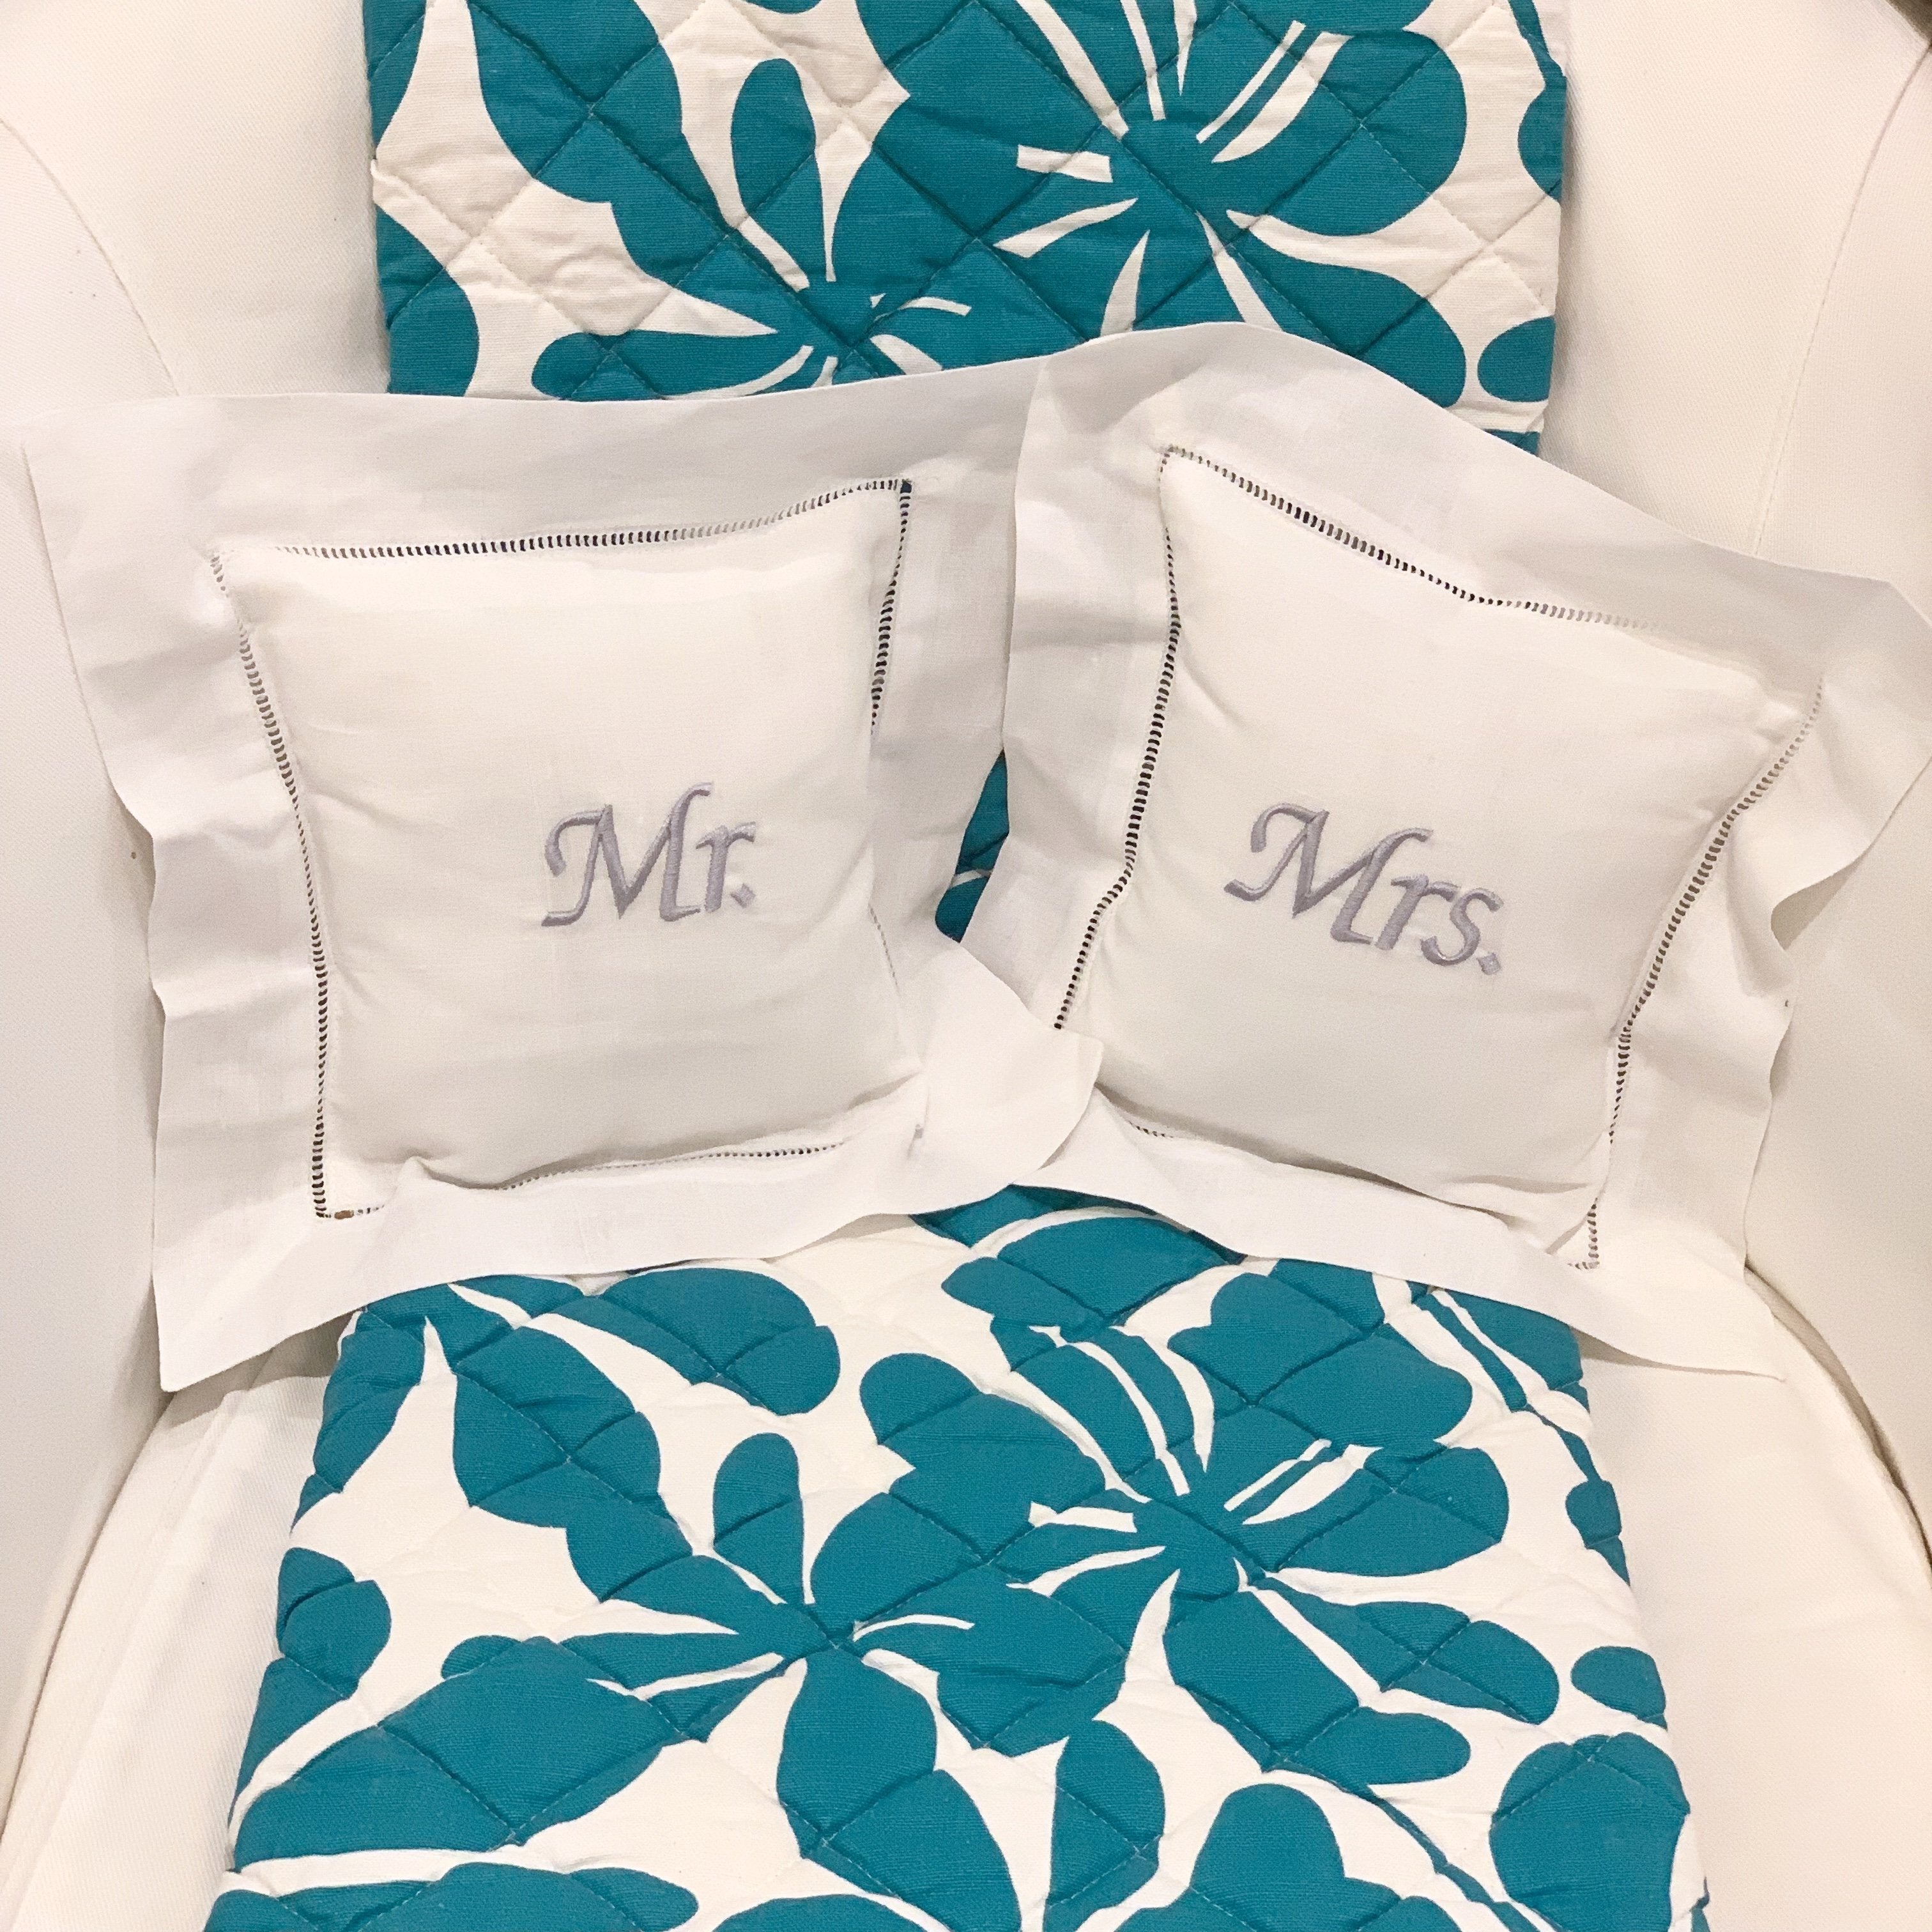 Personalized Hemstitched Pillow – Preppy Monogrammed Gifts